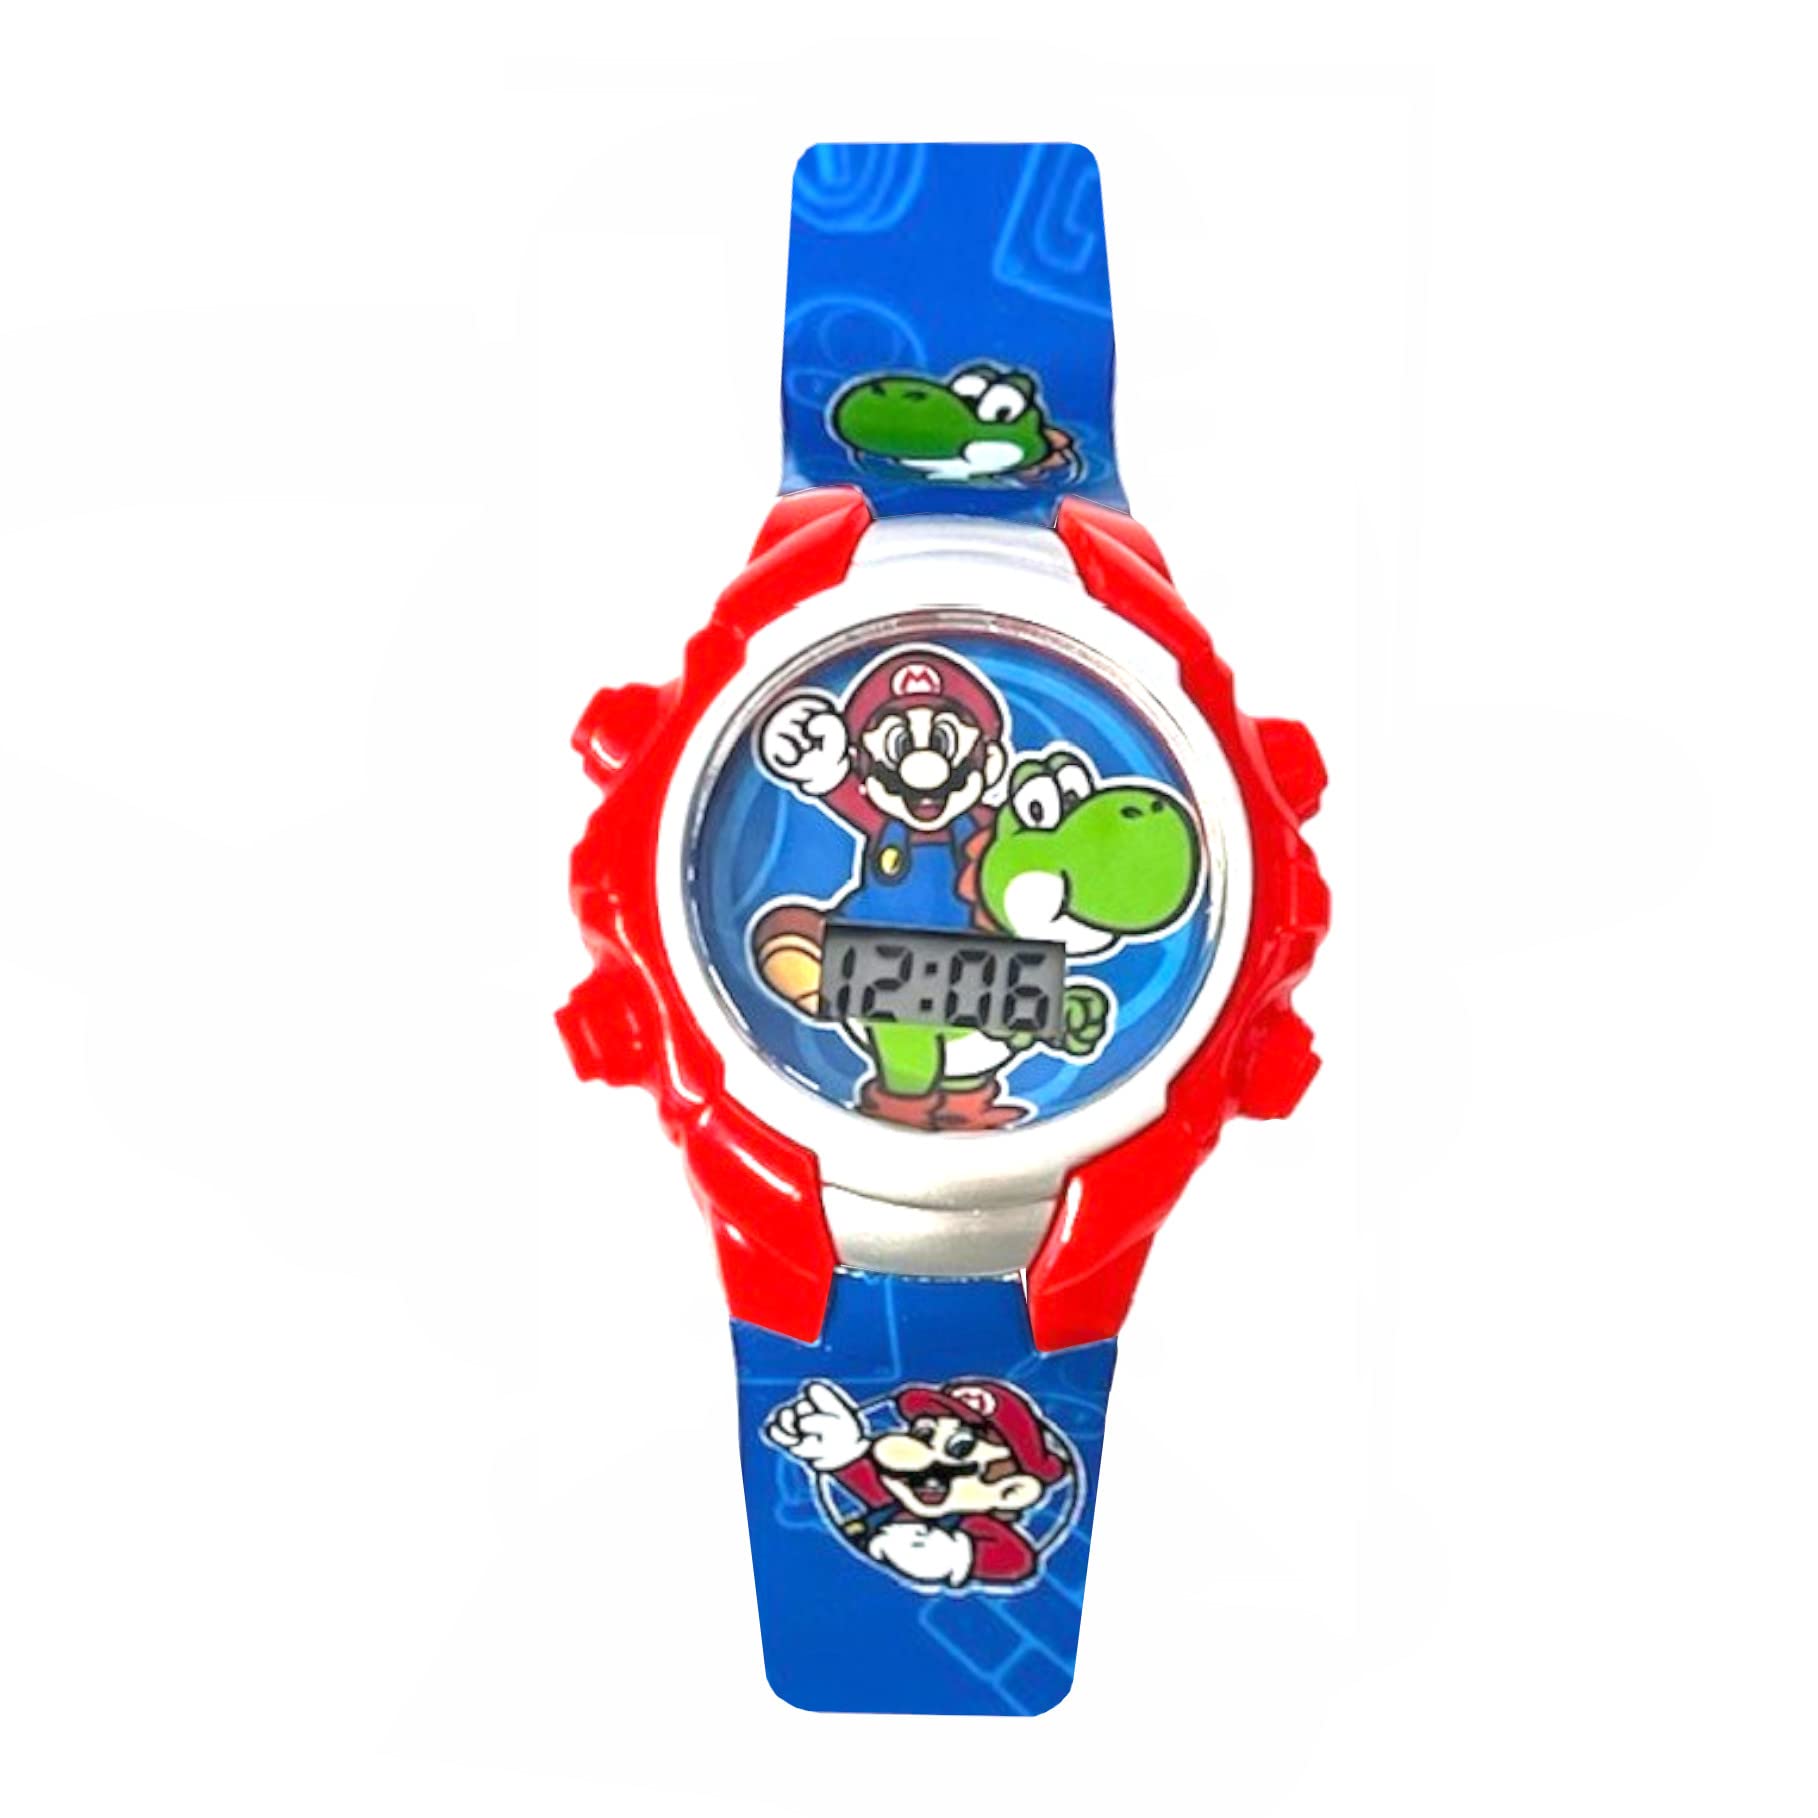 Accutime Kids Nintendo Super Mario Digital Flashing LCD Quartz Childrens Wrist Watch for Boys, Girls, Toddlers with Red and Blue Multicolor Strap (Model: GSM4042AZ)